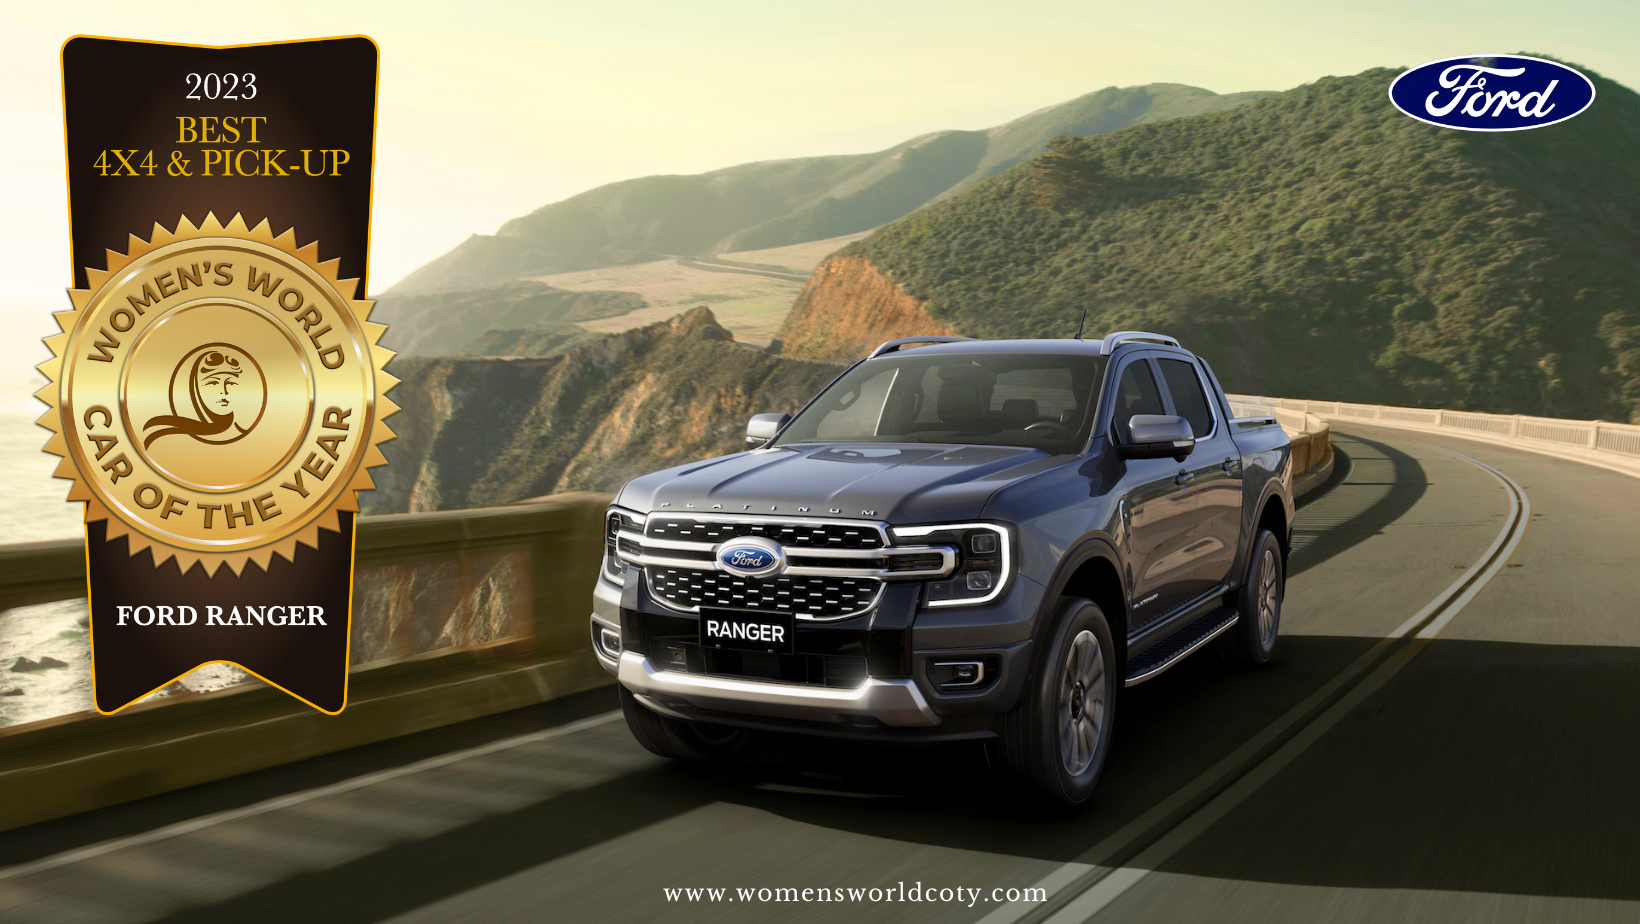 Header-Best-4x4-Pick-up_Ford-Ranger_Womens-World-Car-of-the-Year-2023png